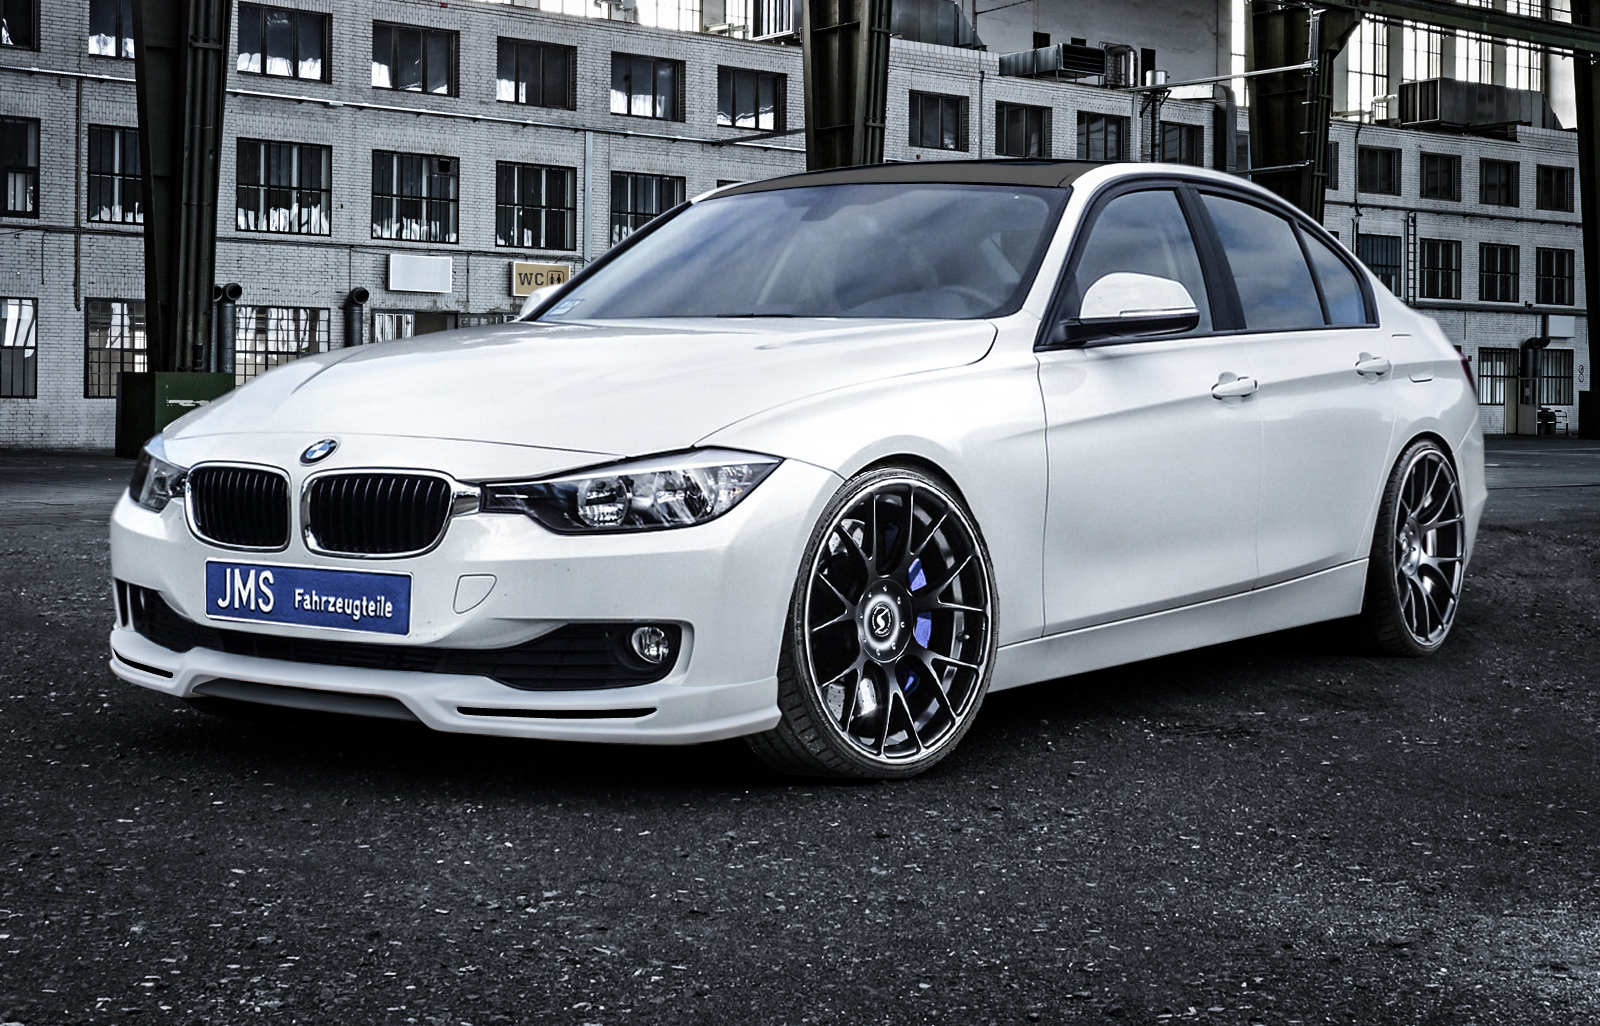 new styling for bmw f30/31 1-series from jms, JMS - Fahrzeugteile